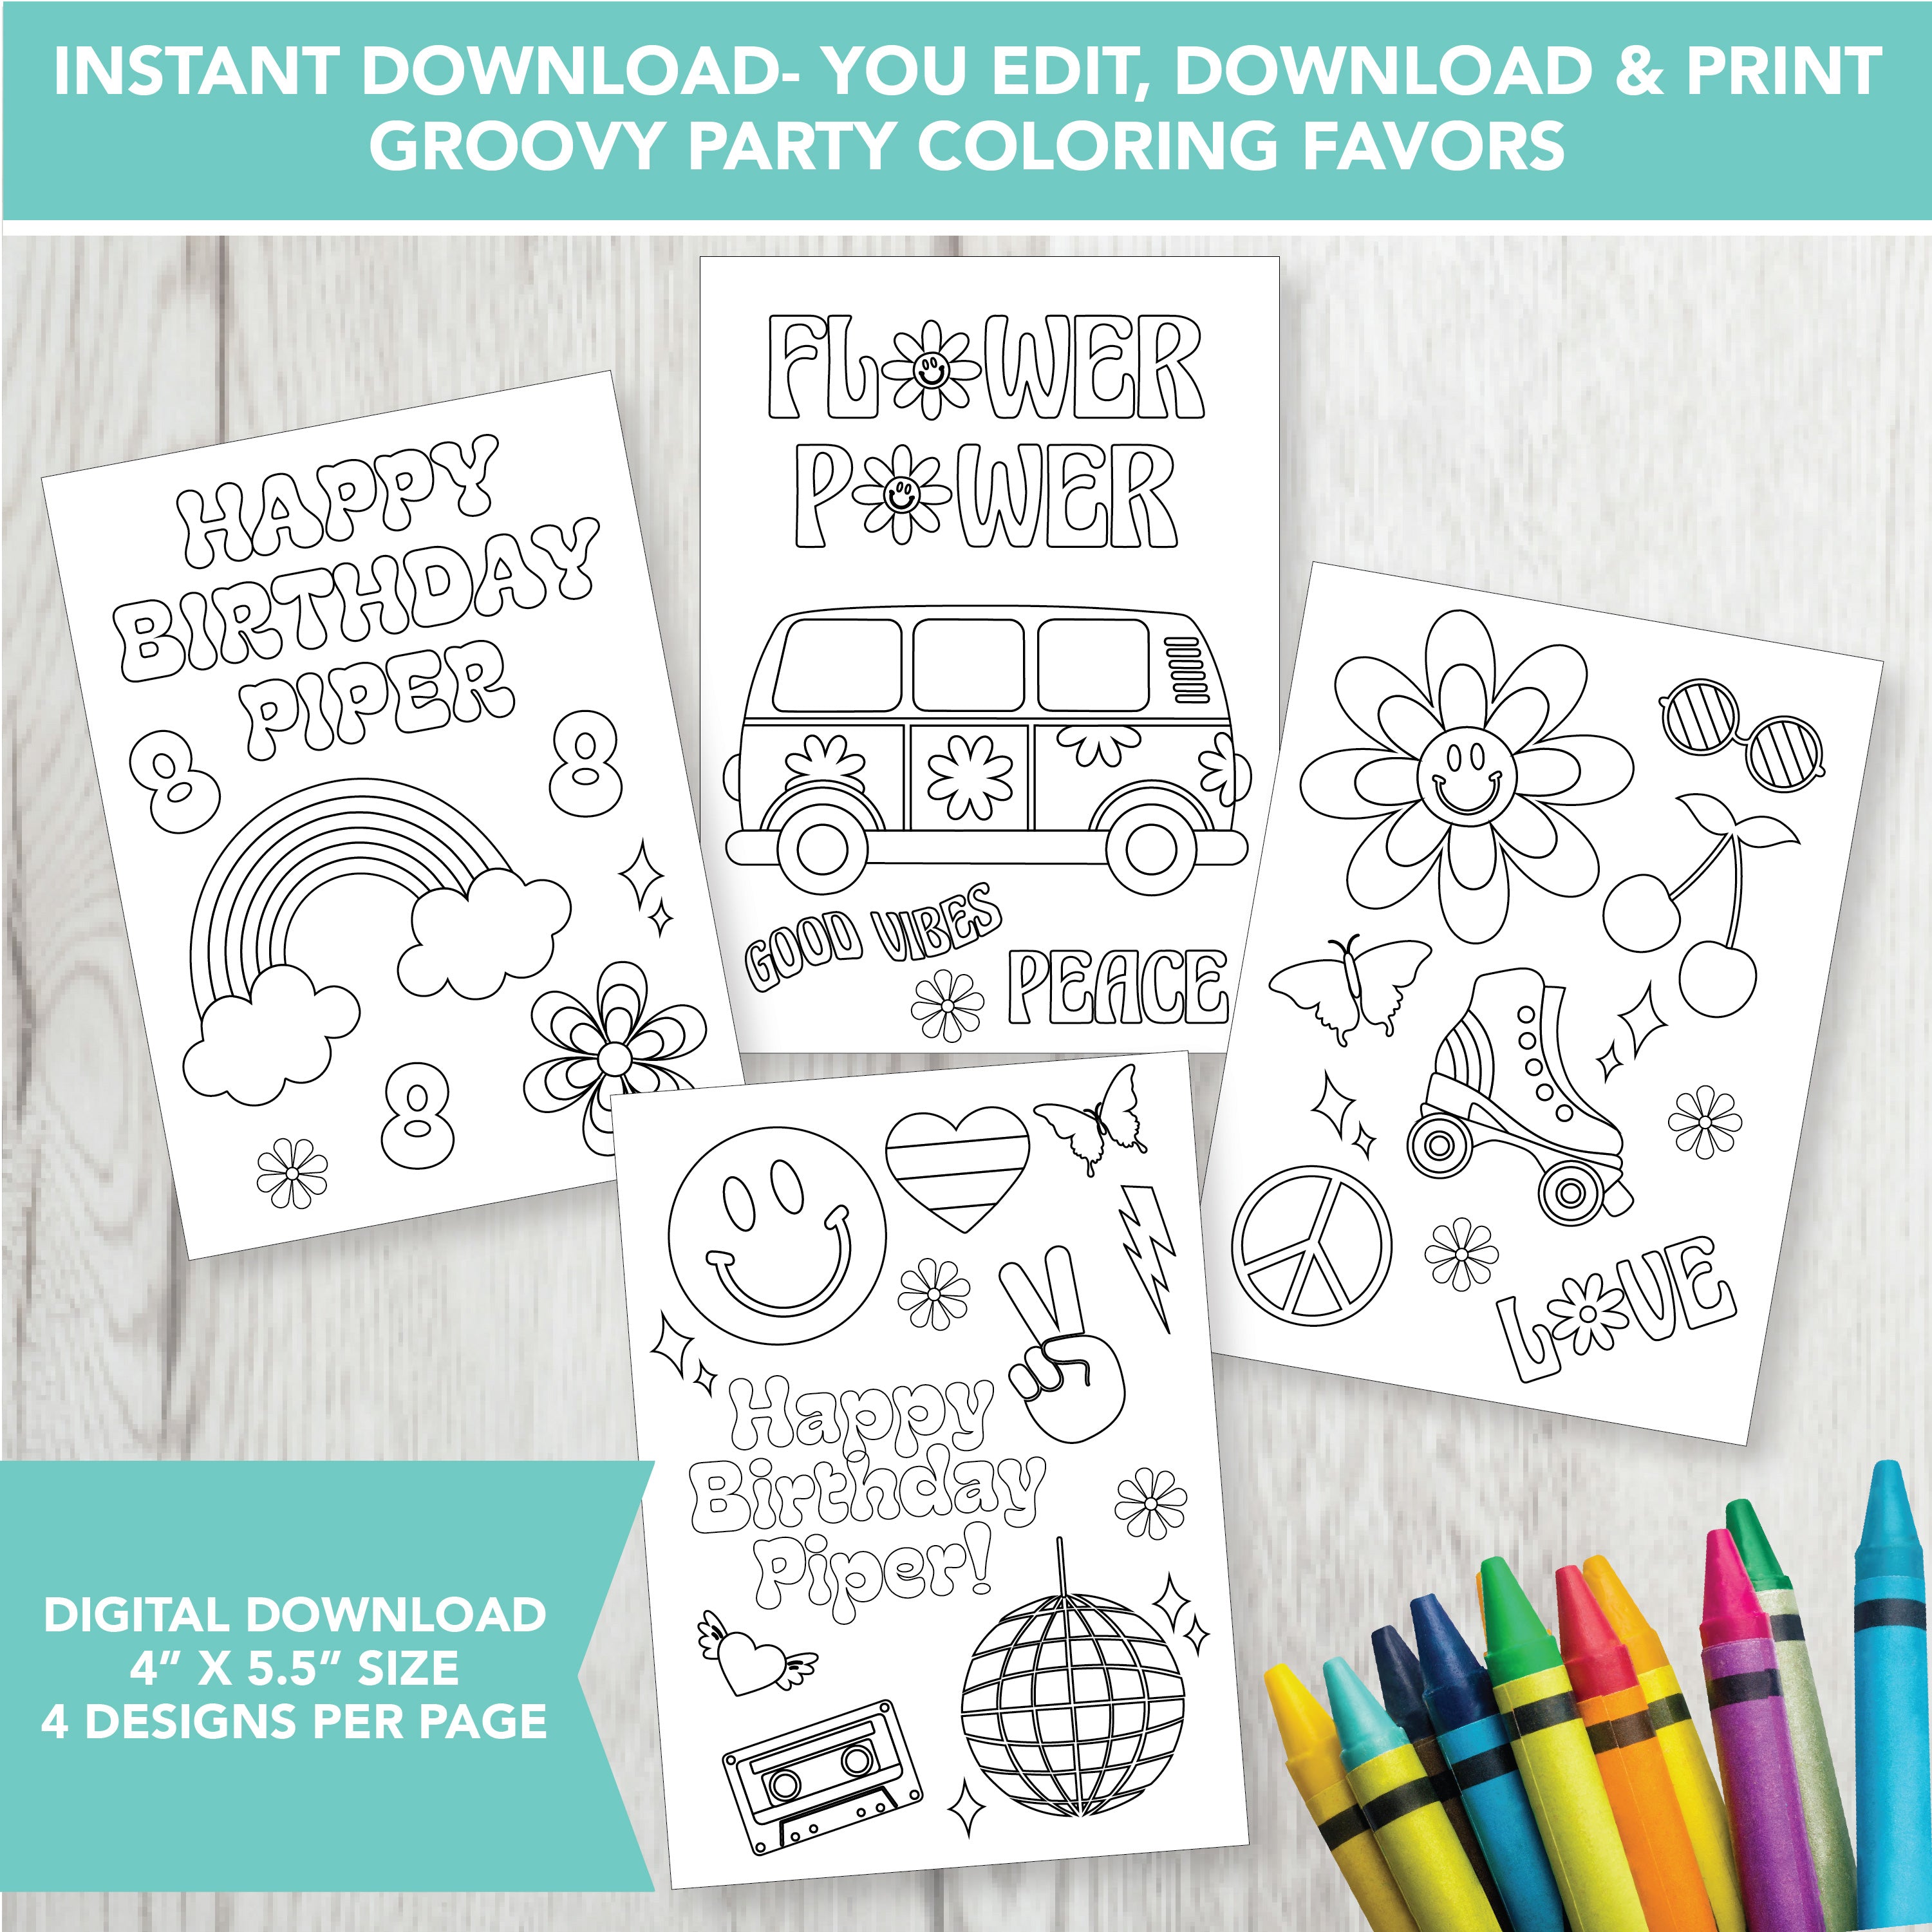 Editable groovy coloring party favors â